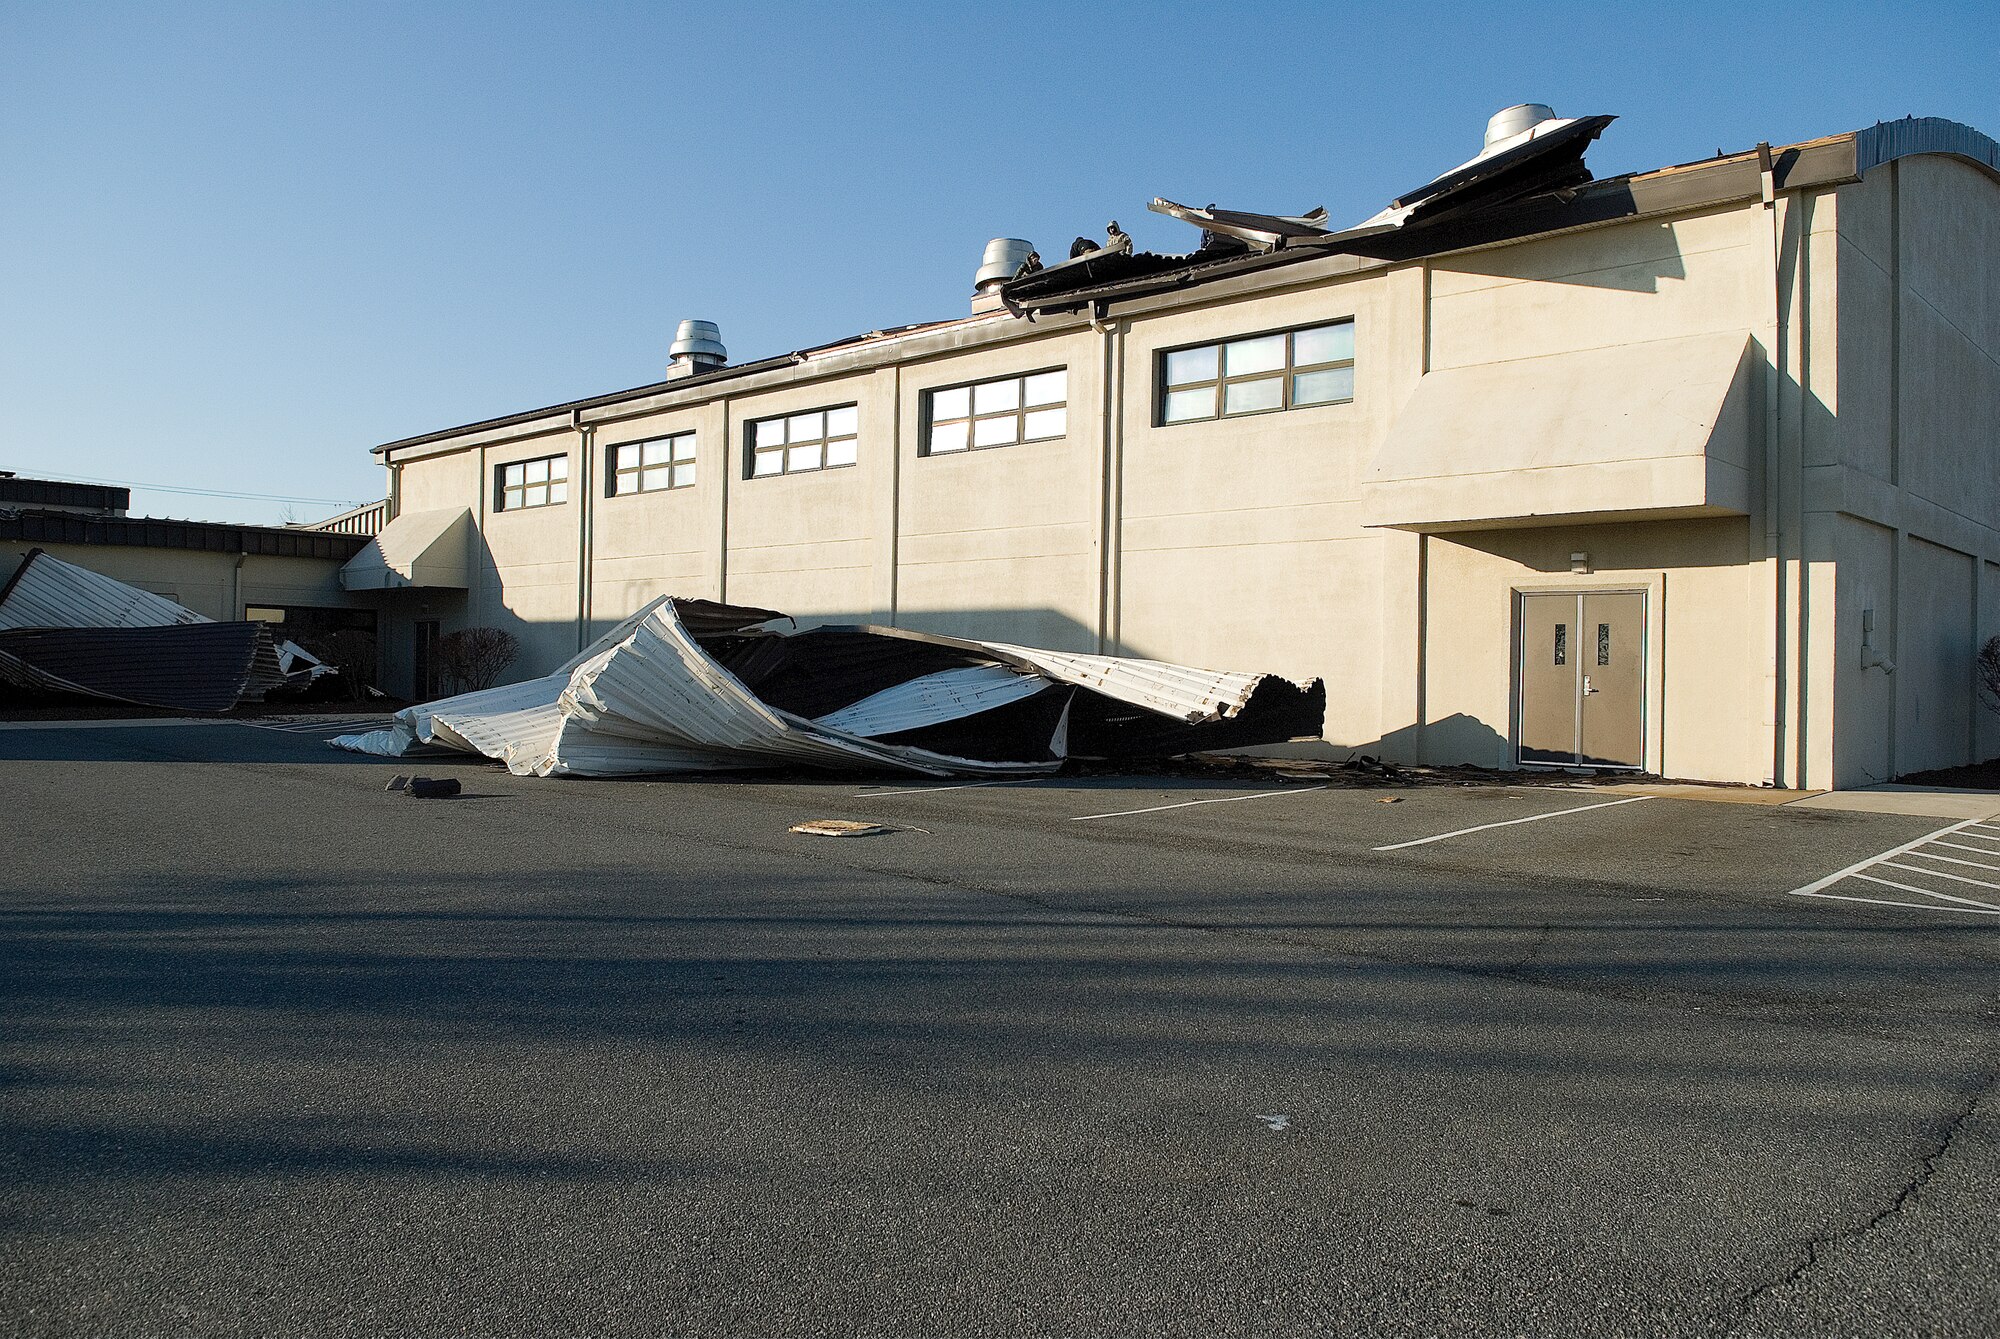 Approximately 12,000 square feet of metal roof was damaged at the Dover Air Force Base Fitness Center Feb. 10. High winds, with gusts reaching 51 knots, on Dover Air Force Base Feb. 10, caused the roofing to pull from the structure. (U.S. Air Force photo/Roland Balik)